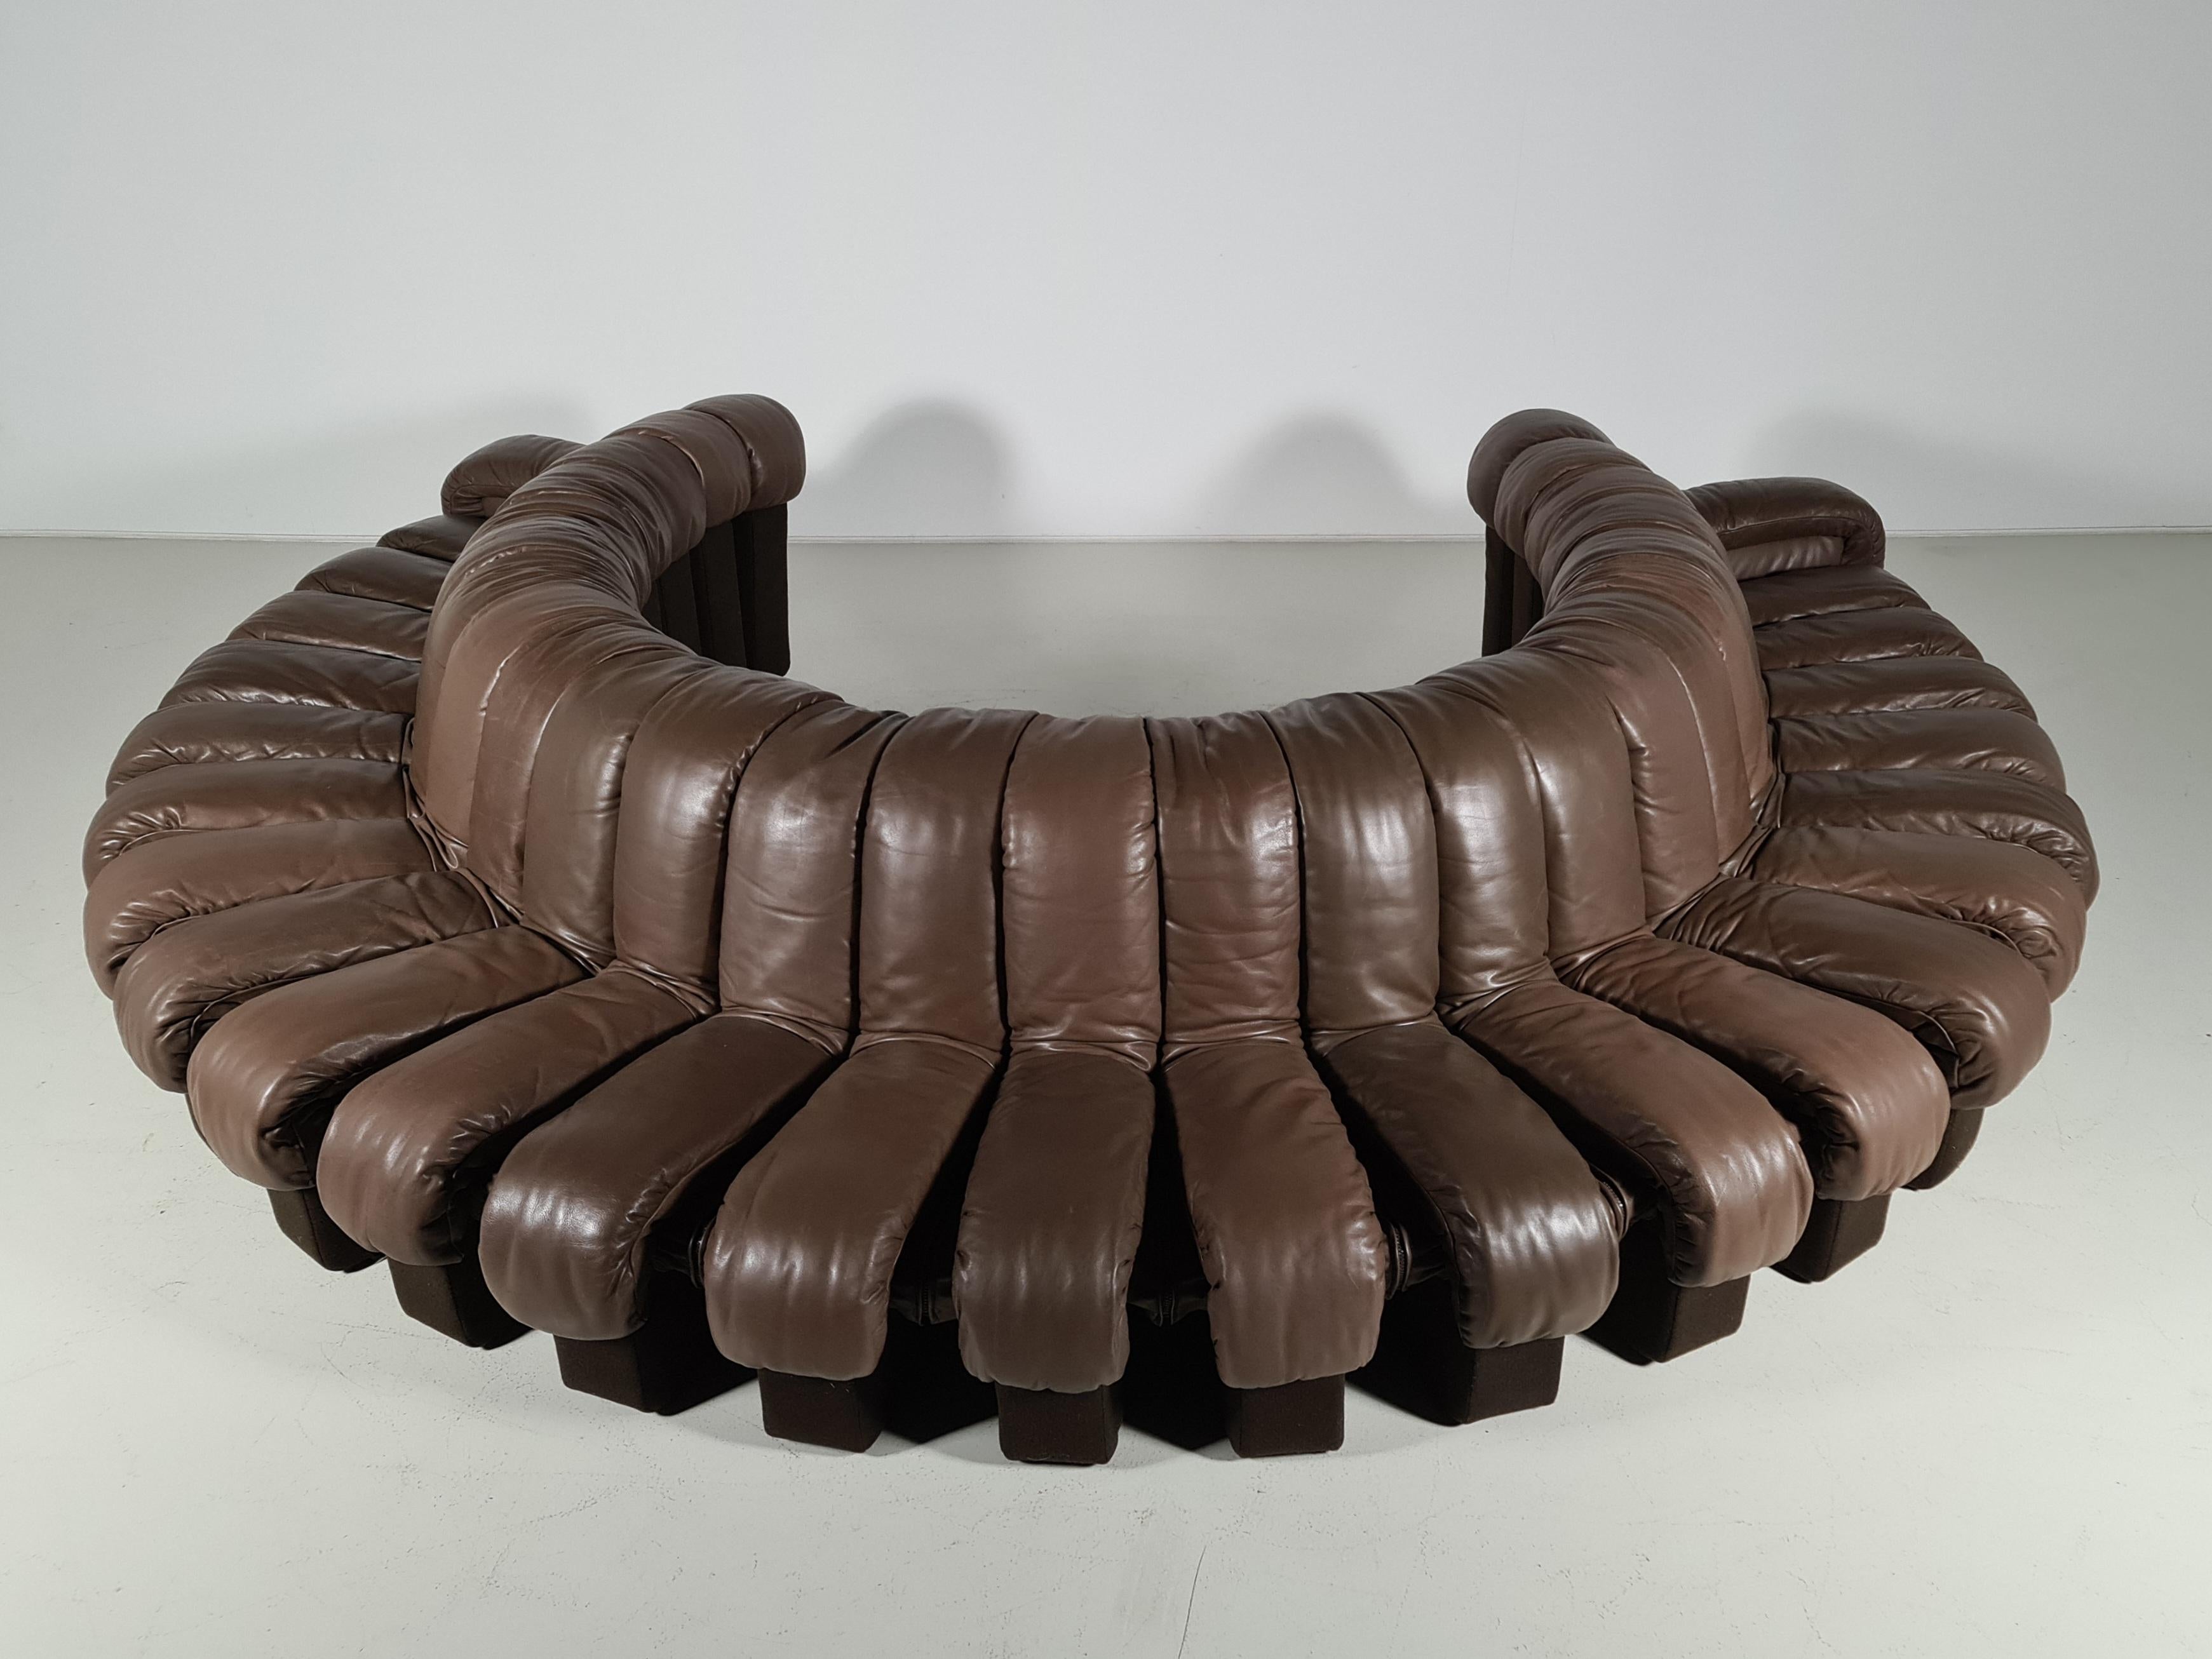 De Sede DS 600 “Non-Stop” sectional leather sofa by Heinz Ulrich, Ueli Berger and Elenora Peduzzi-Riva from the 1970s. Original brown leather seating with brown felt bases. 28 pieces, all of which hook and zip together. You can make 2 sofas of 14